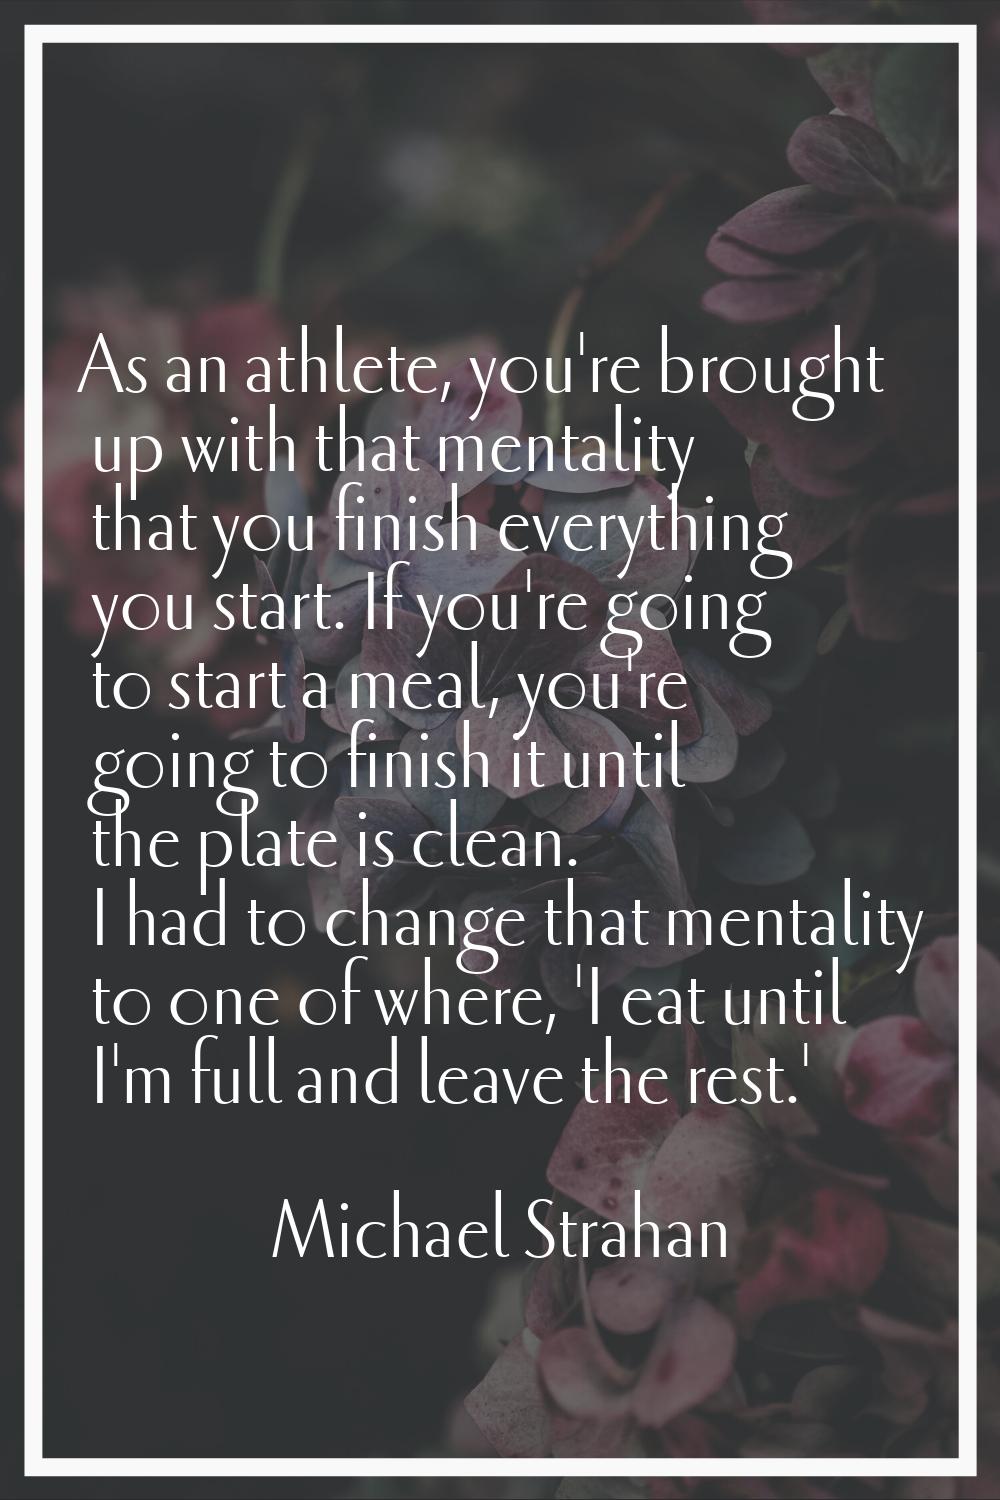 As an athlete, you're brought up with that mentality that you finish everything you start. If you'r